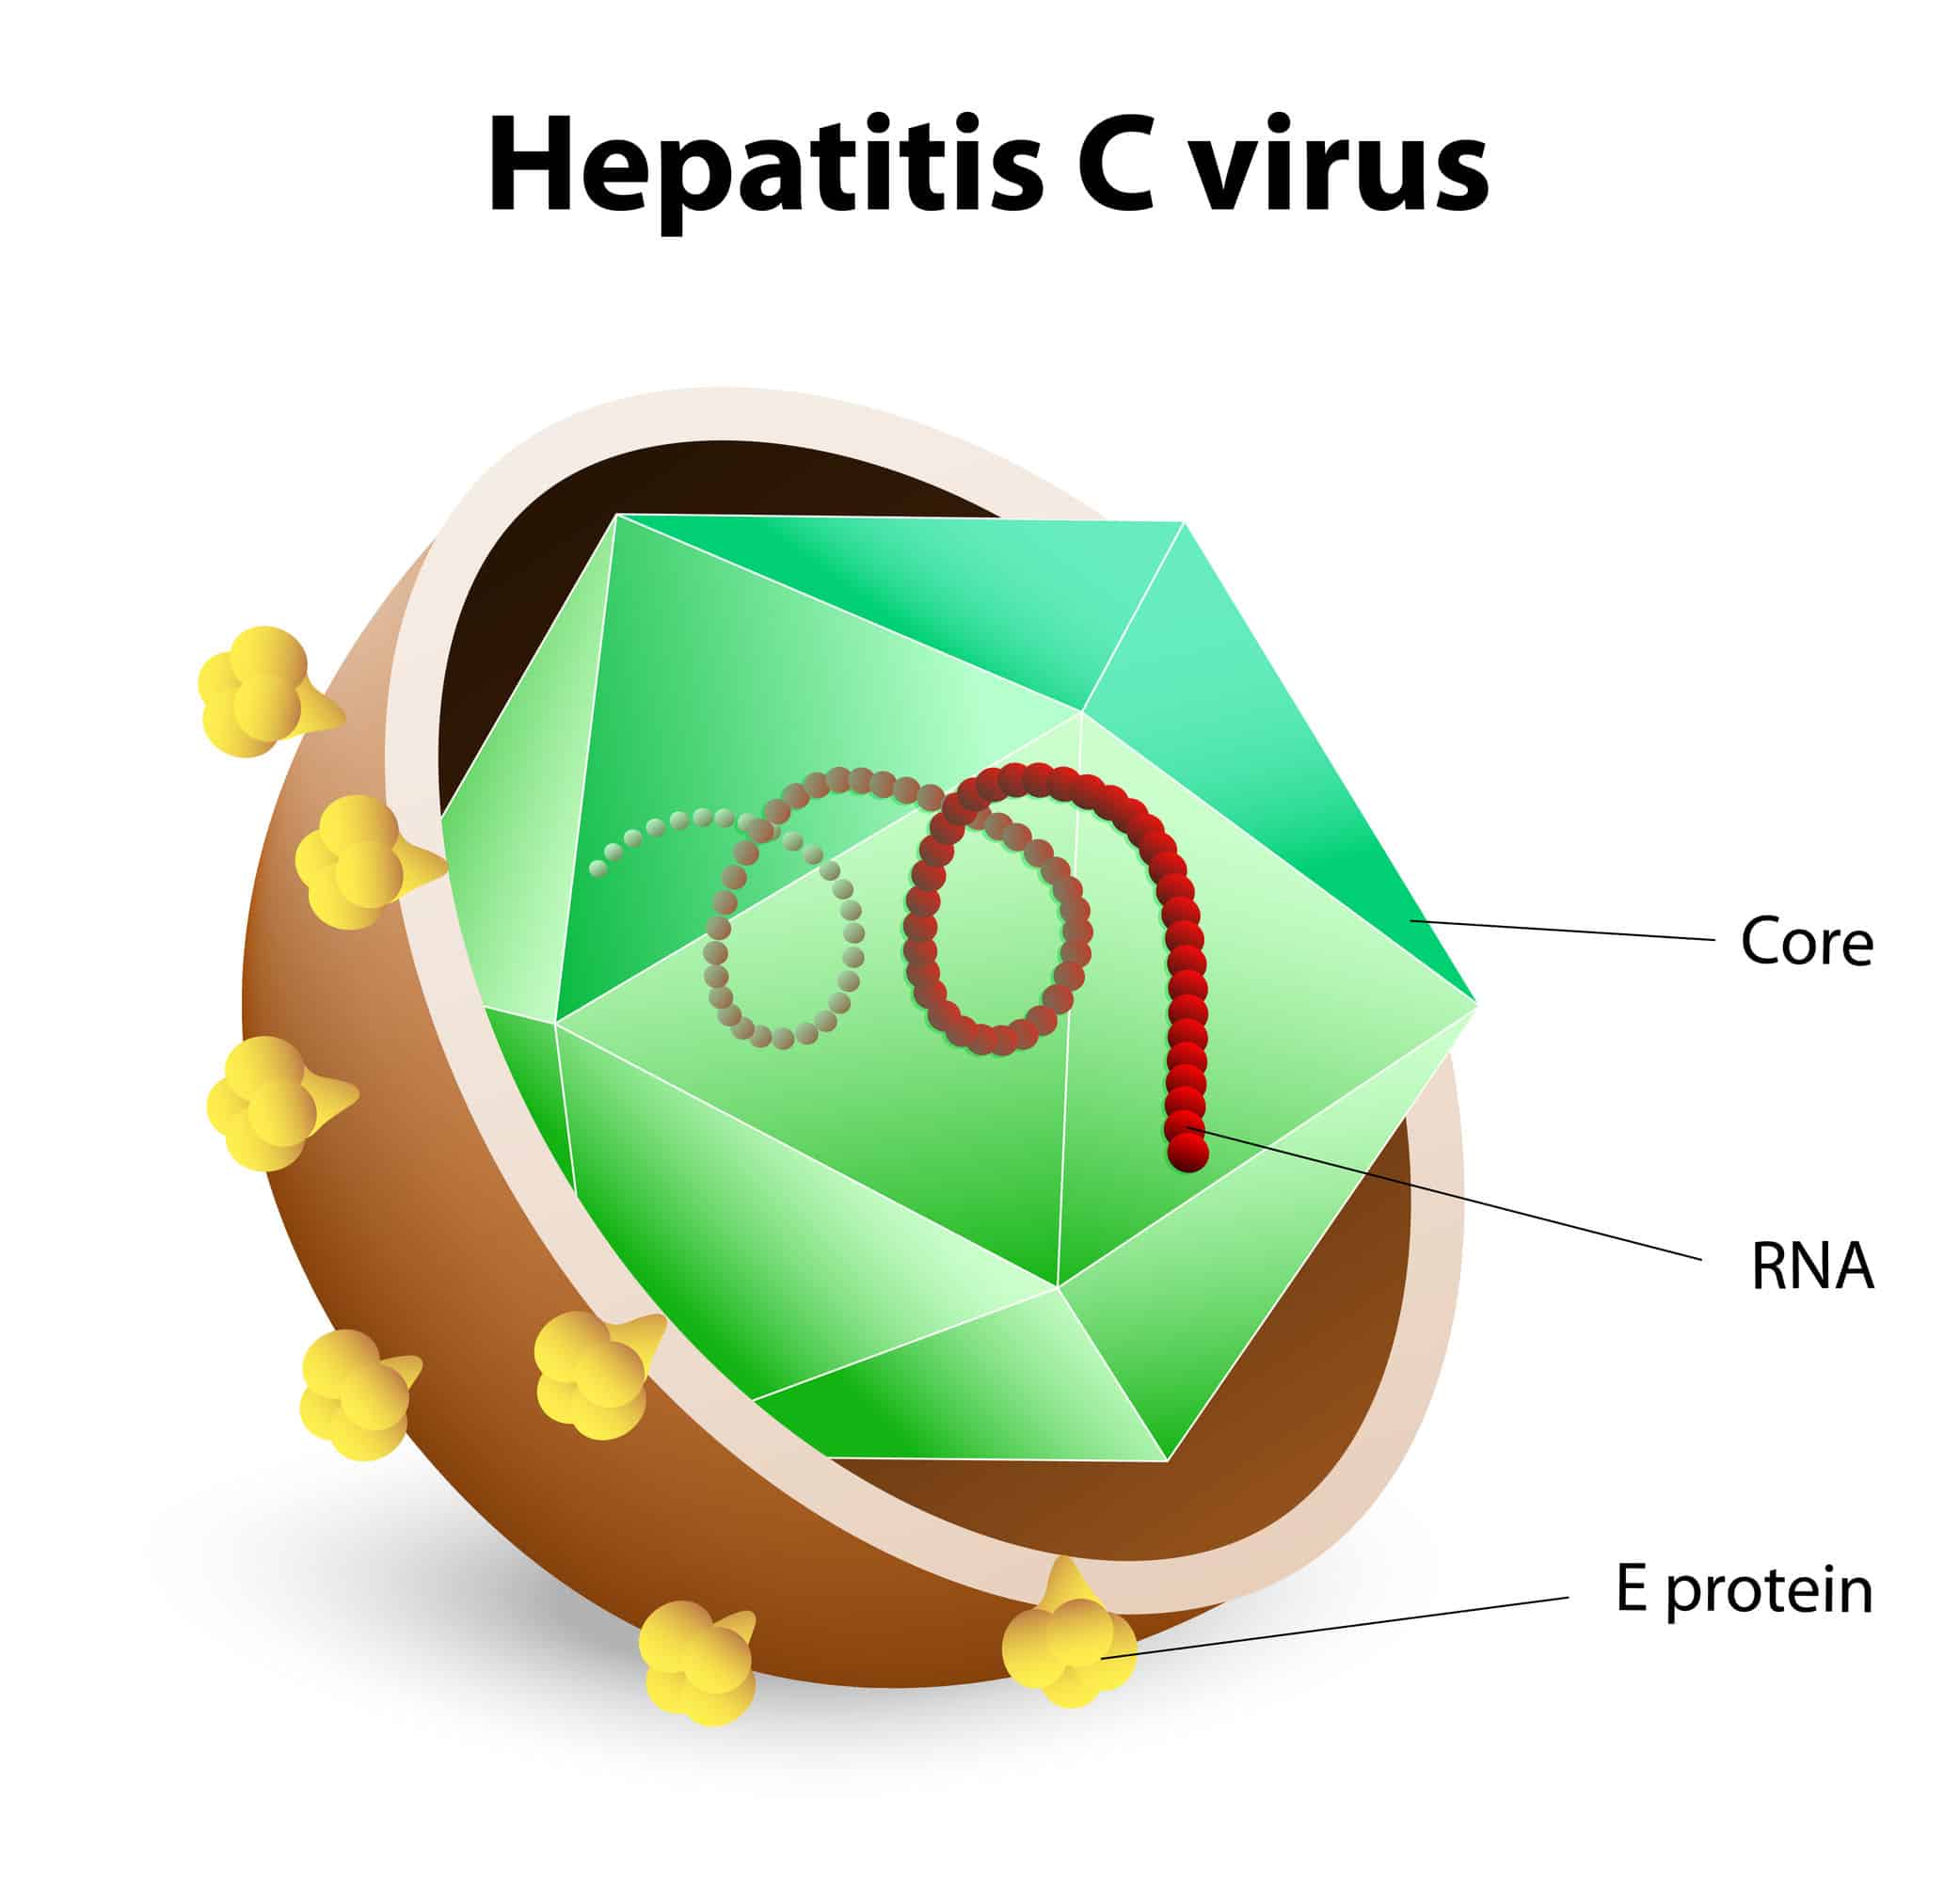 The Recent Hepatitis C Outbreak â What Doctors Need to Know ...